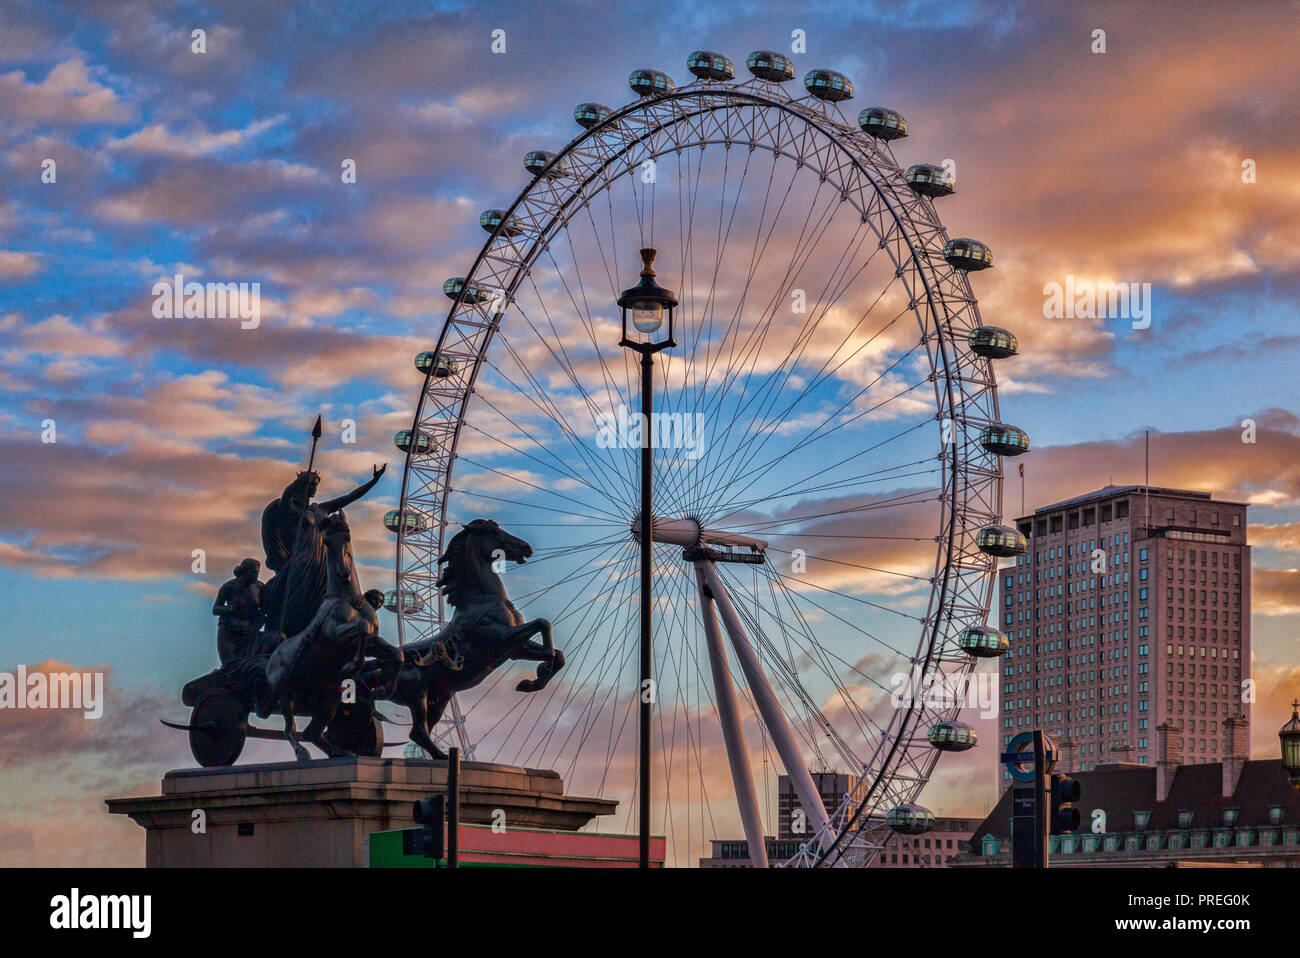 Statue of Boudica, Queen of the Iceni, and the London Eye. Stock Photo